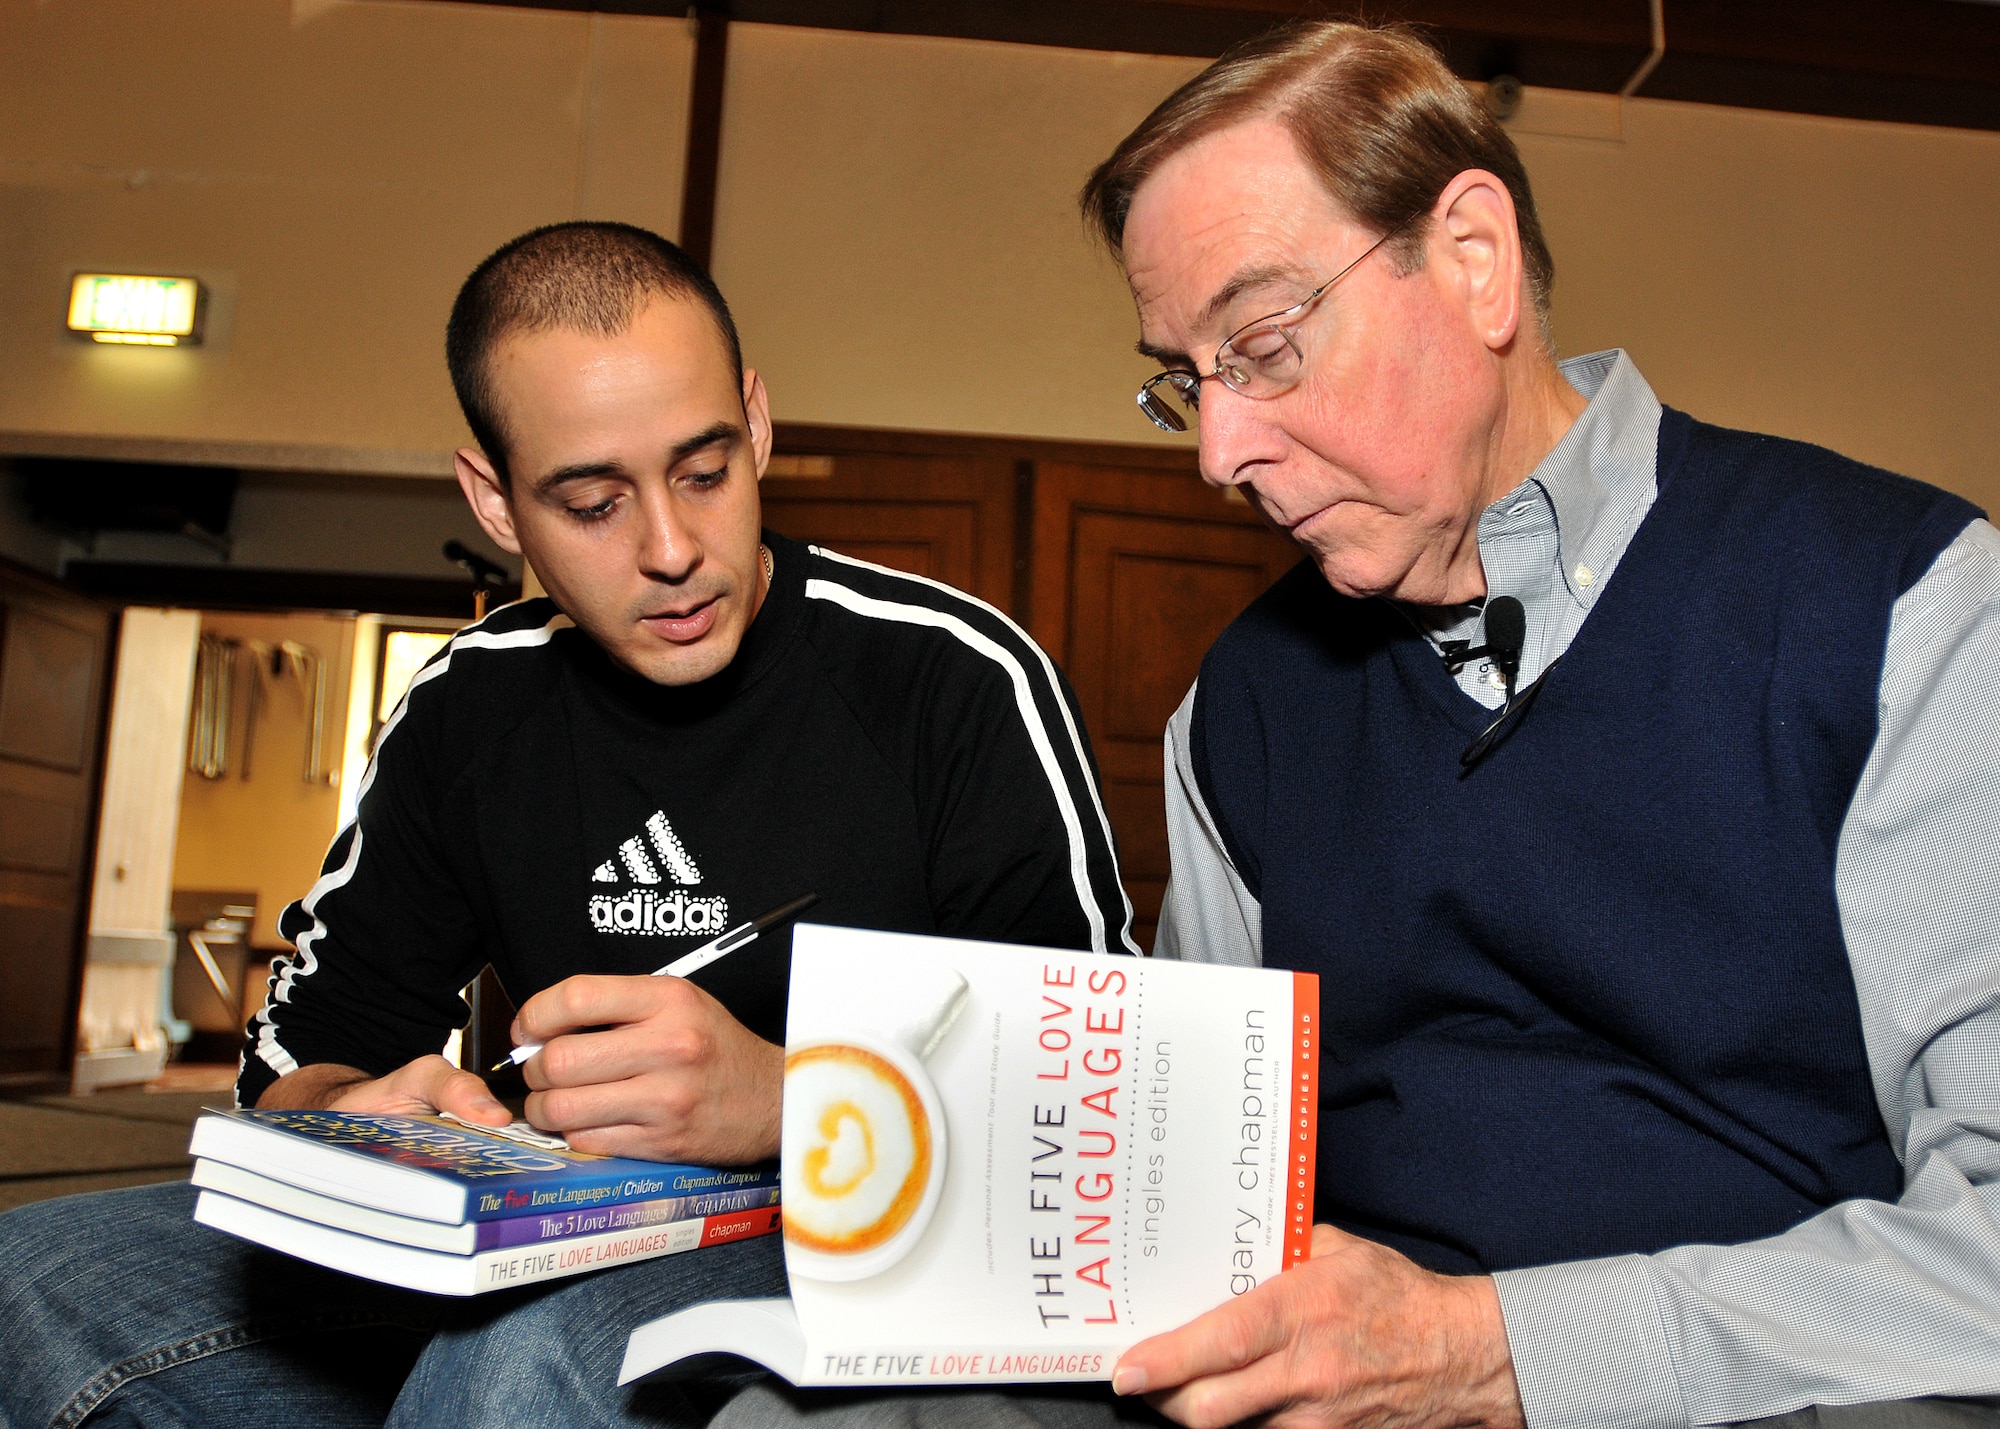 Dr. Gary Chapman, author of The Five Love Languages, signs a copy of his book for Tech. Sgt. Noel Sosa, 86th Contingency Aeromedical Staging Facility, during Dr. Chapman's marriage seminar at the Ramstein Officers Club Oct 30. (U.S. Air Force photo by Tech. Sgt. Markus M. Maier)